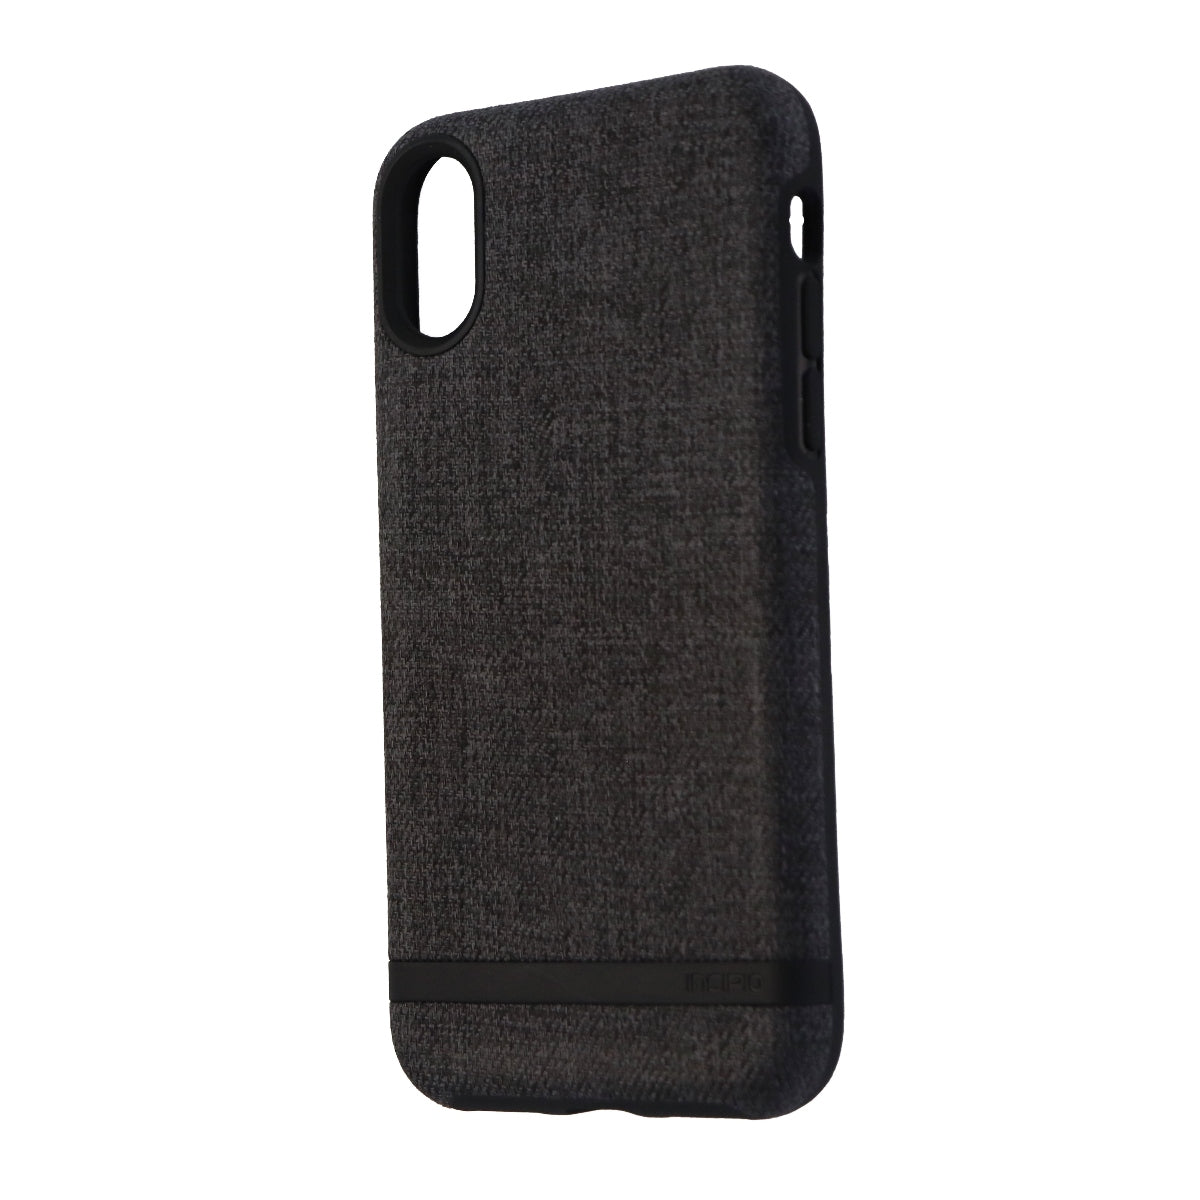 Incipio Esquire Series Hard Fabric Case for Apple iPhone X 10 - Dark Gray/Black Cell Phone - Cases, Covers & Skins Incipio    - Simple Cell Bulk Wholesale Pricing - USA Seller